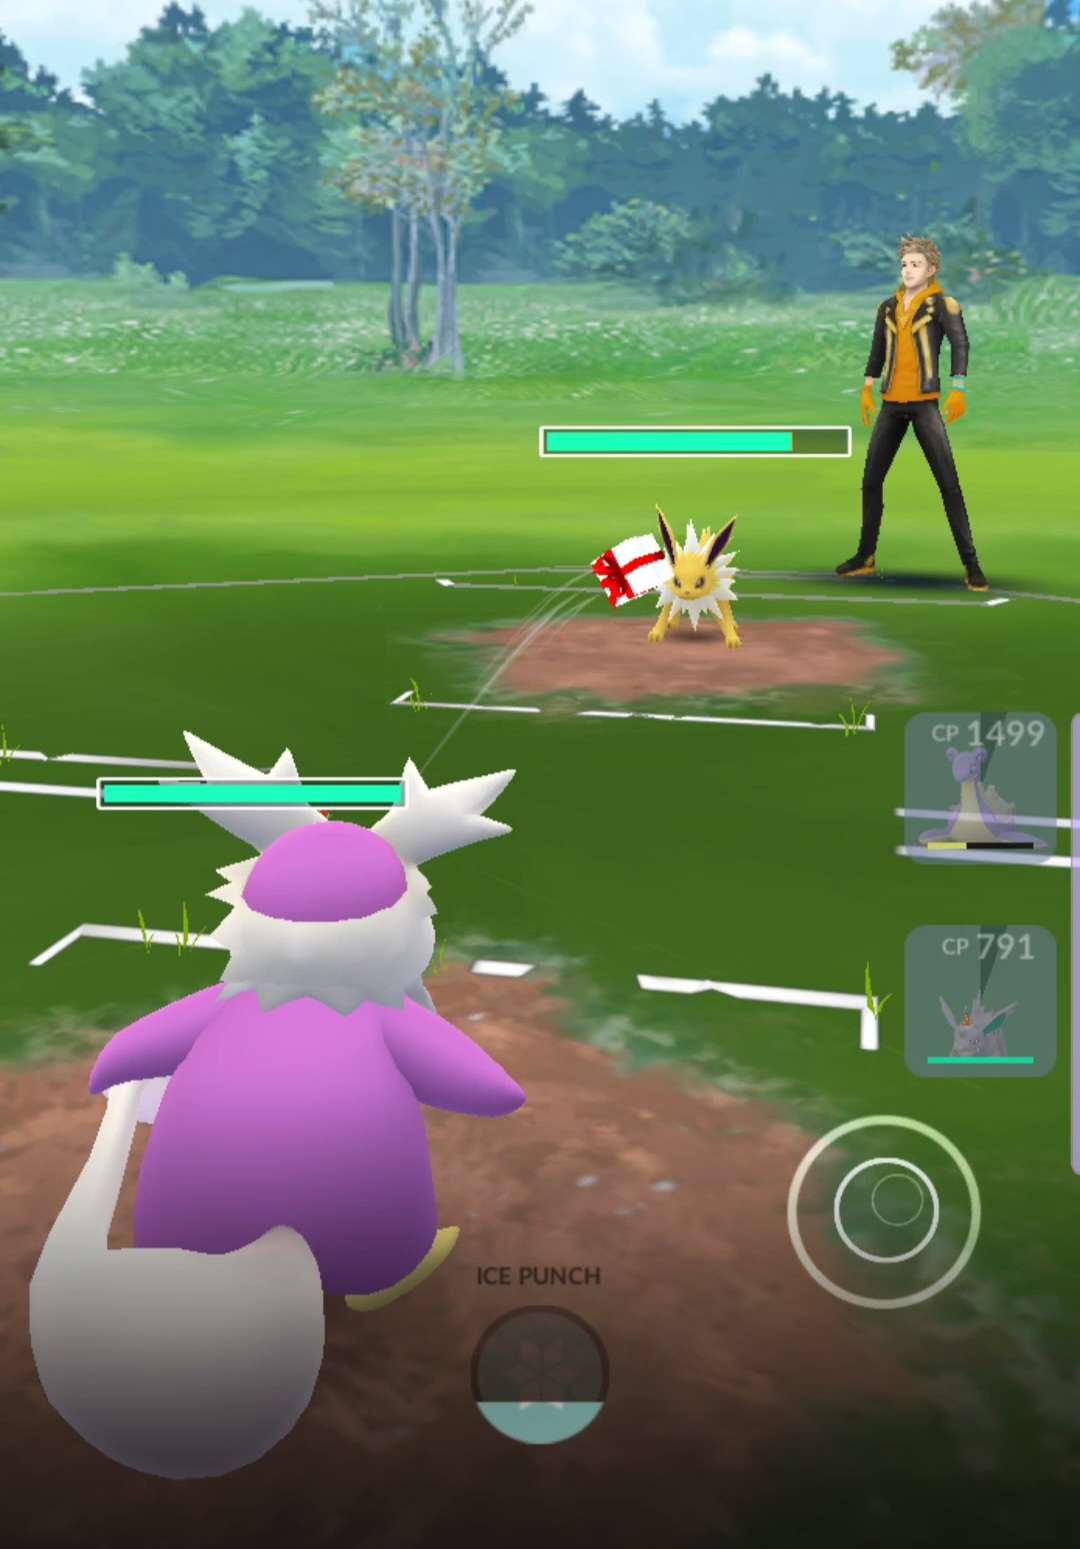 Normal Types in Pokémon GO: Present and Future